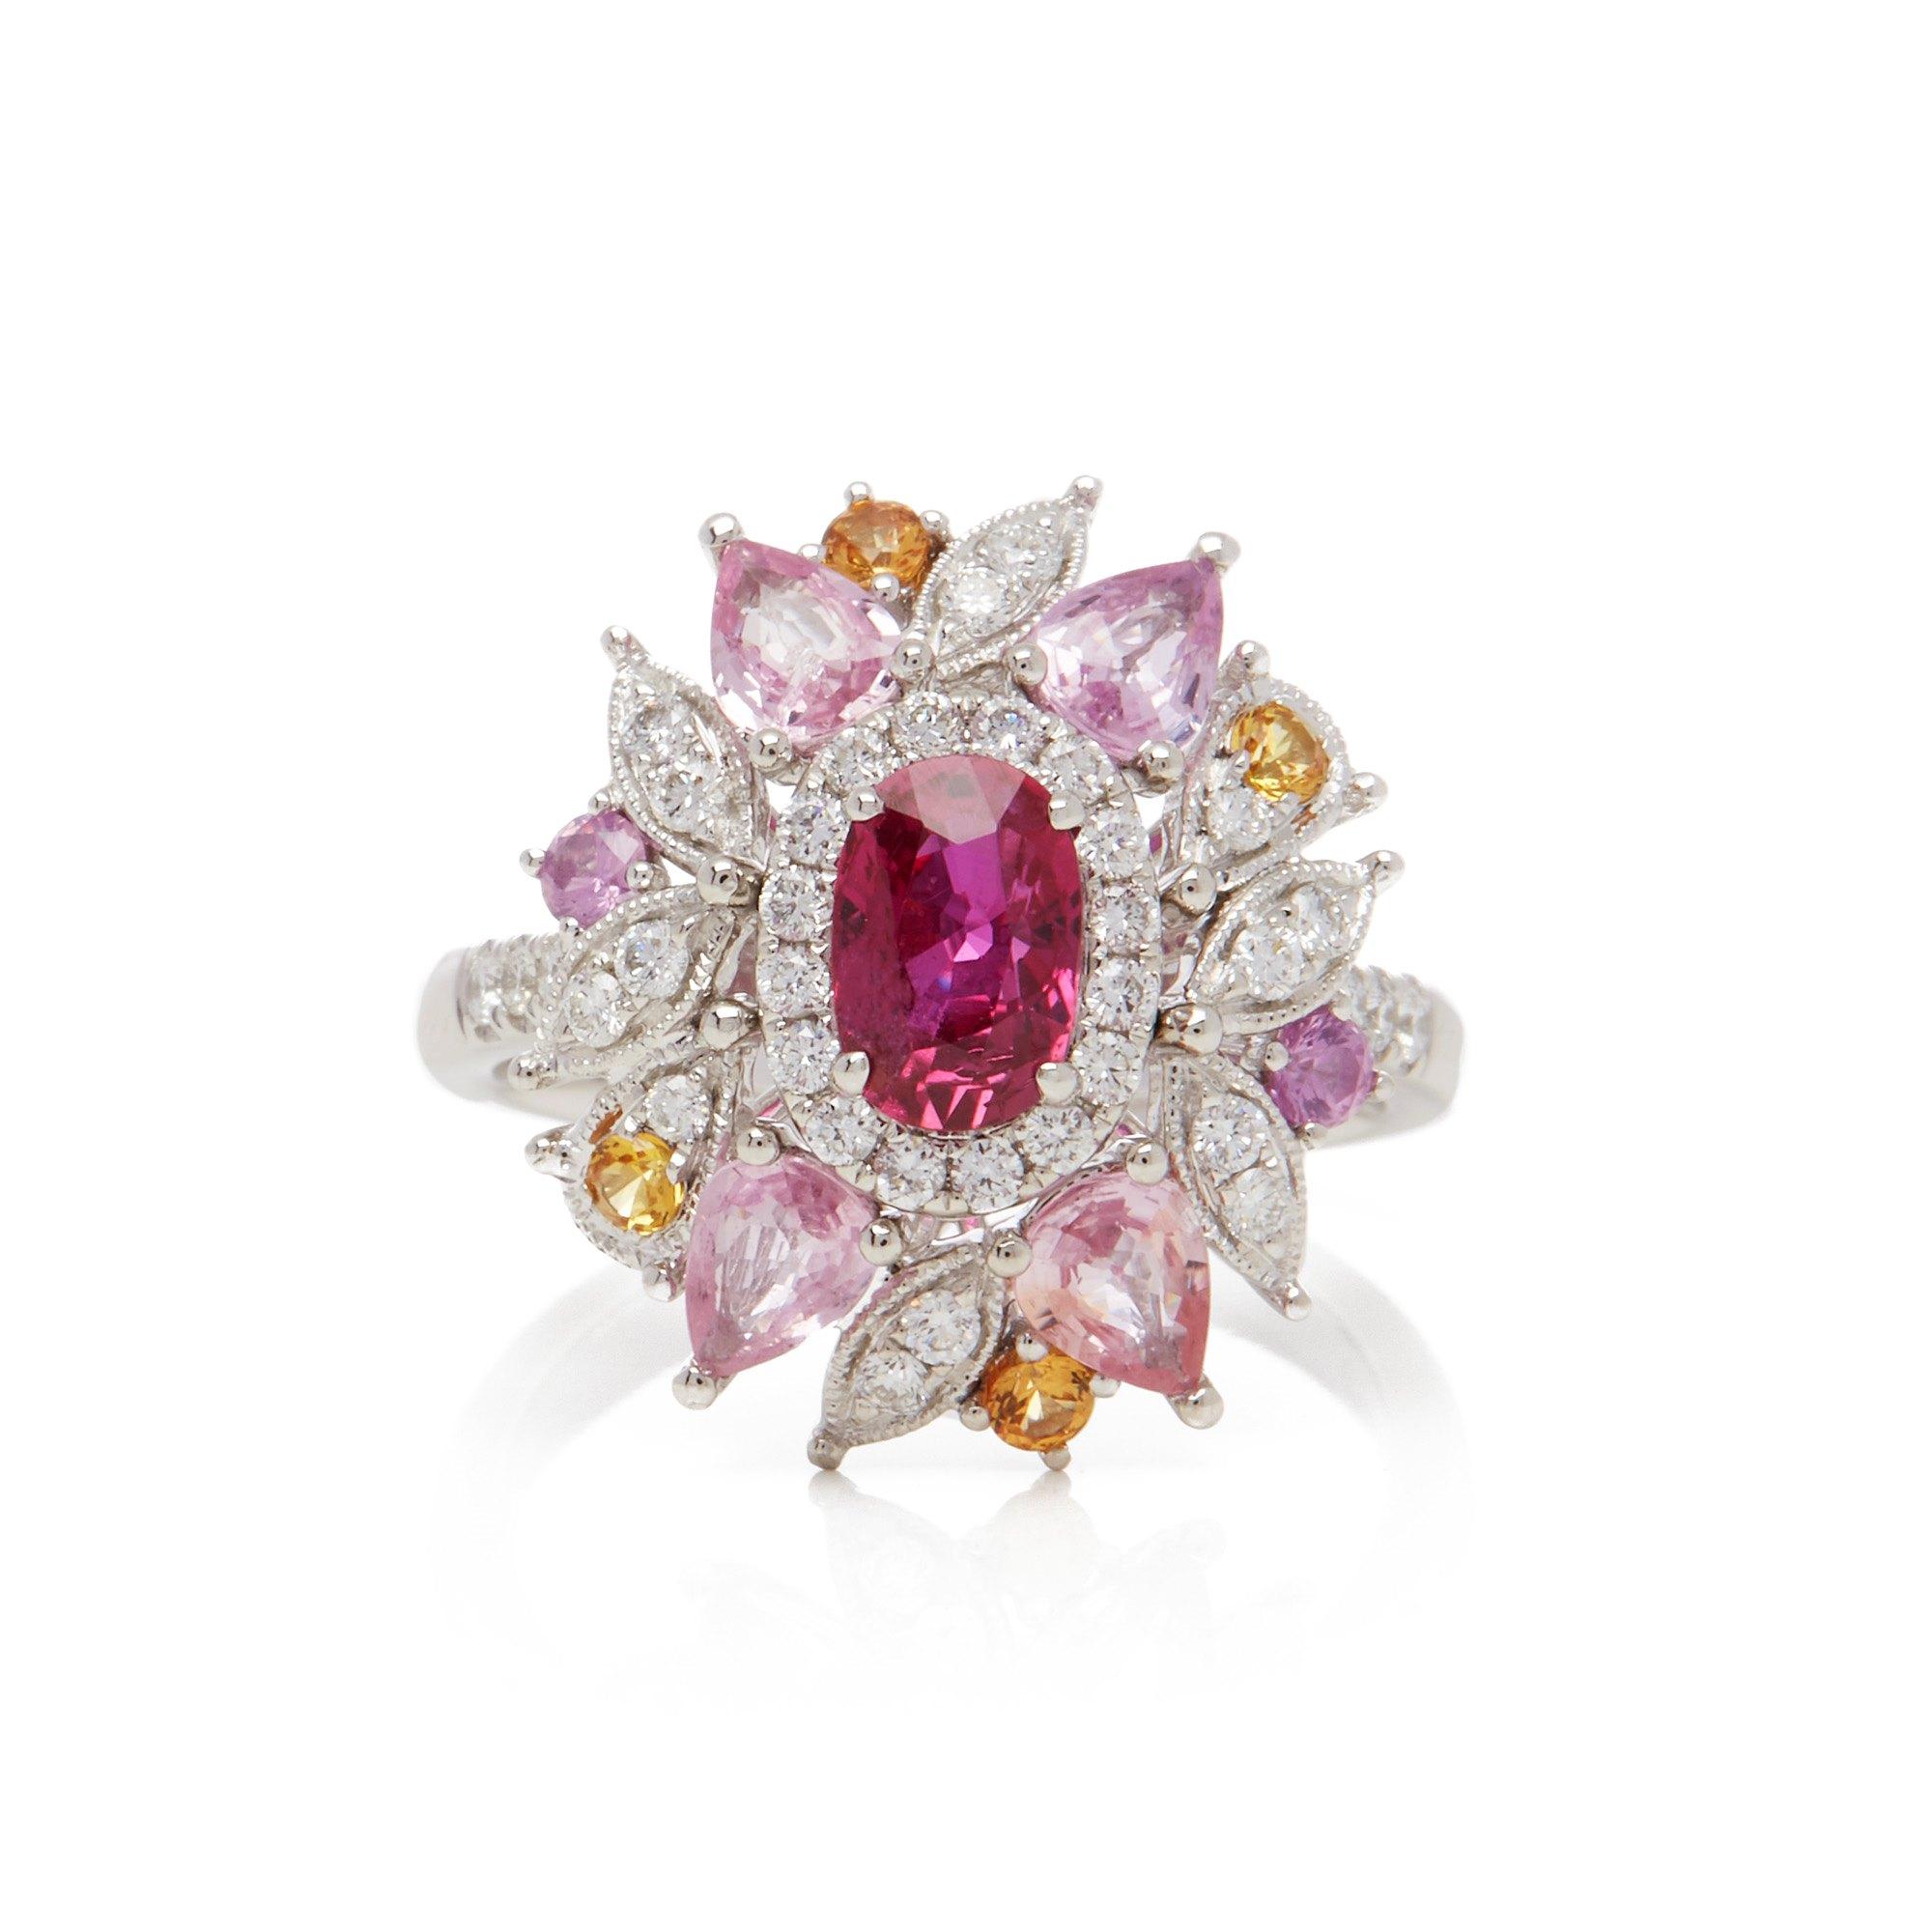 This ring designed by David Jerome is from his private collection and features one oval cut Ruby sourced in Mozambique Totalling 1.08cts. Set with a mix of round brilliant cut Diamonds, pink and yellow Sapphires totalling 1.94cts combined. Mounted